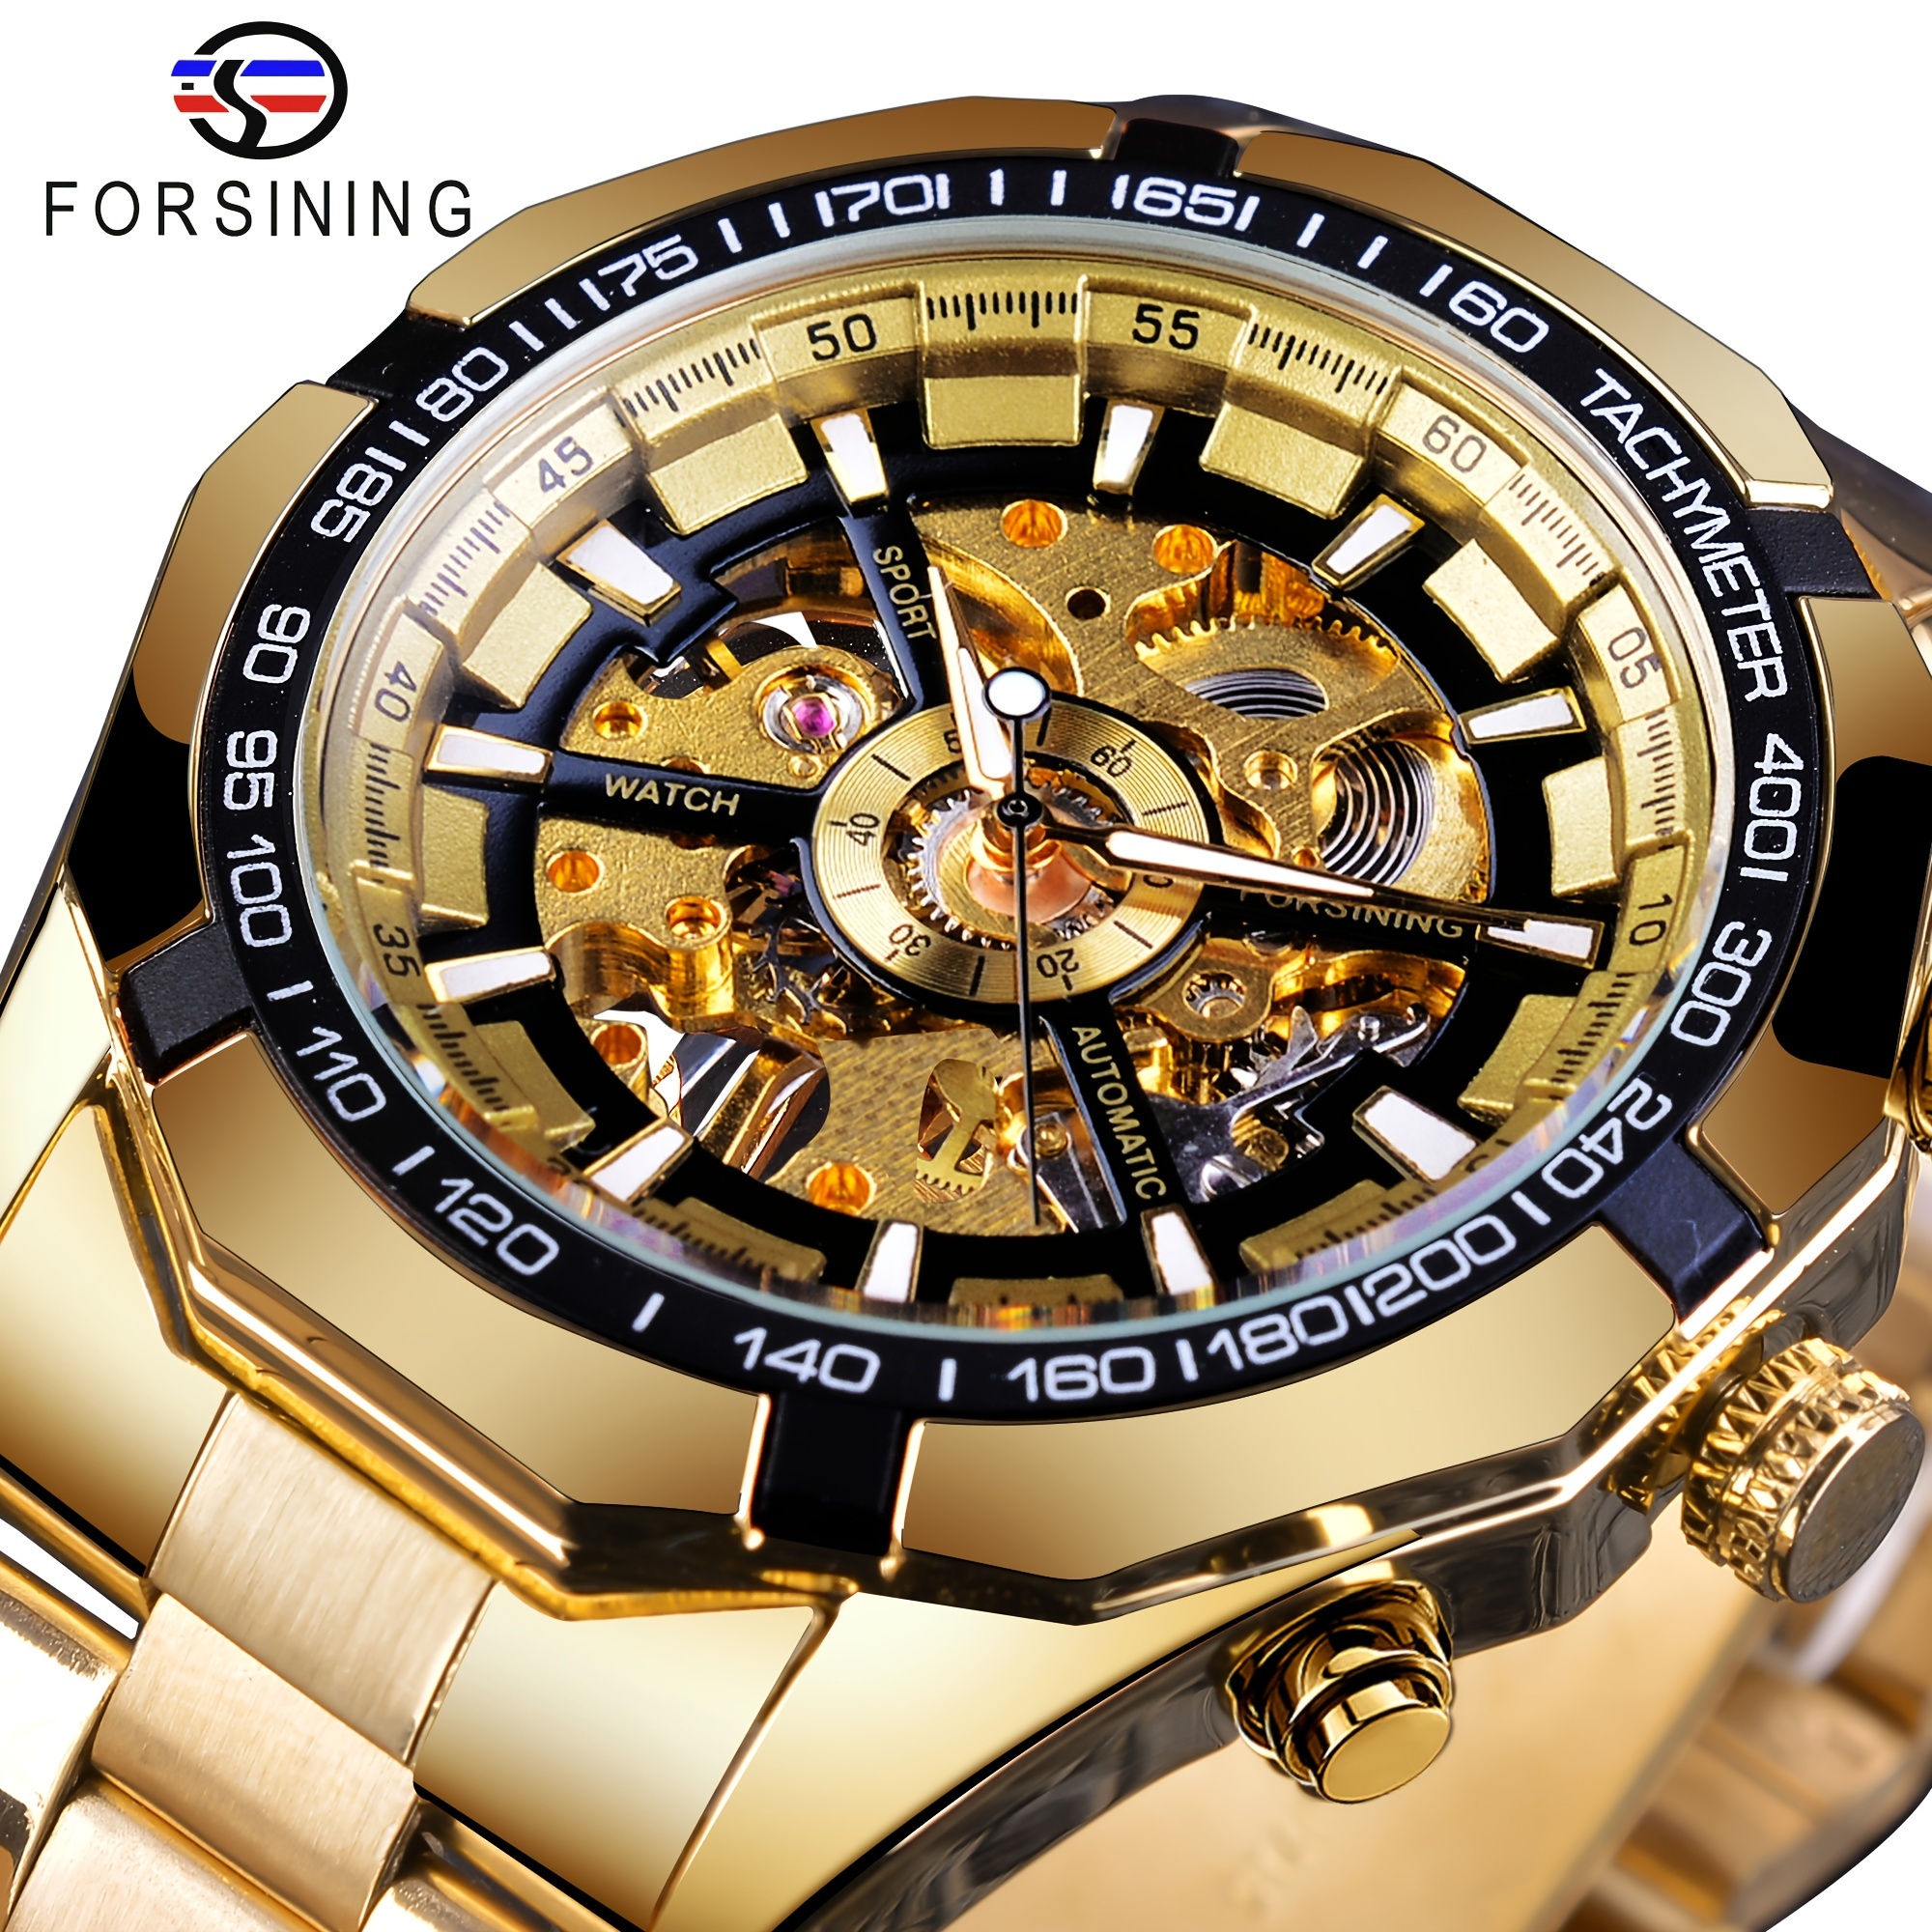 

Forsining Stainless Steel Business Men's Automatic Mechanical Watches, Fashion Luminous Hollow Sport Wrist Watch, Ideal Choice For Gifts